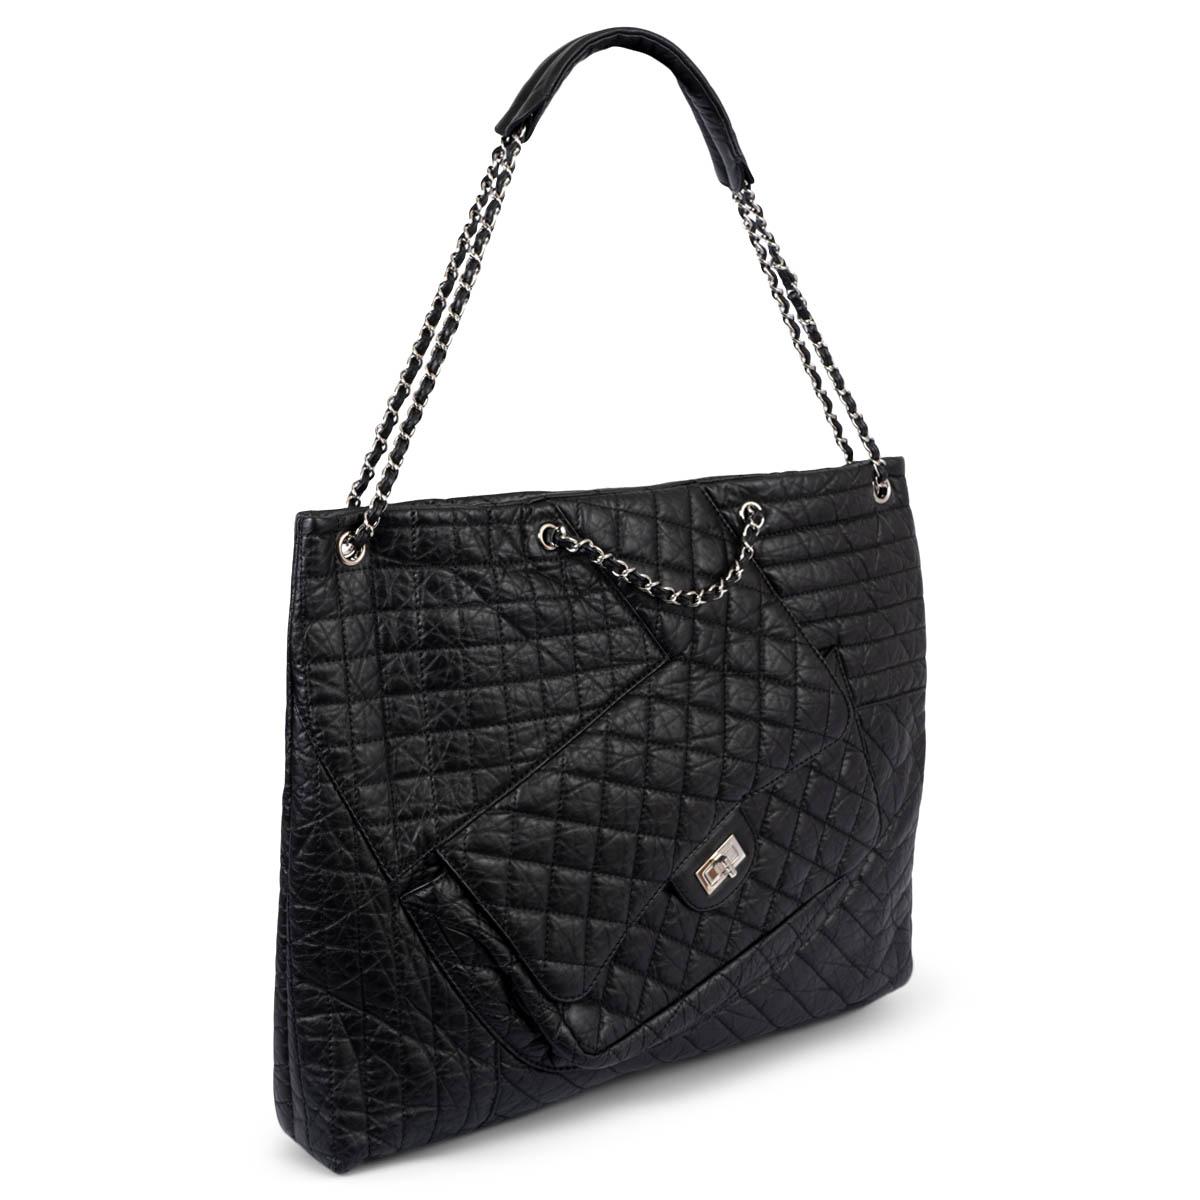 100% authentic Chanel Karl Cabas tote in black quilted aged calfskin leather featuring silver-tone hardware. The design comes with silver-tone chain link leather threaded shoulder straps with shoulder pads and patch pockets on the rear with a